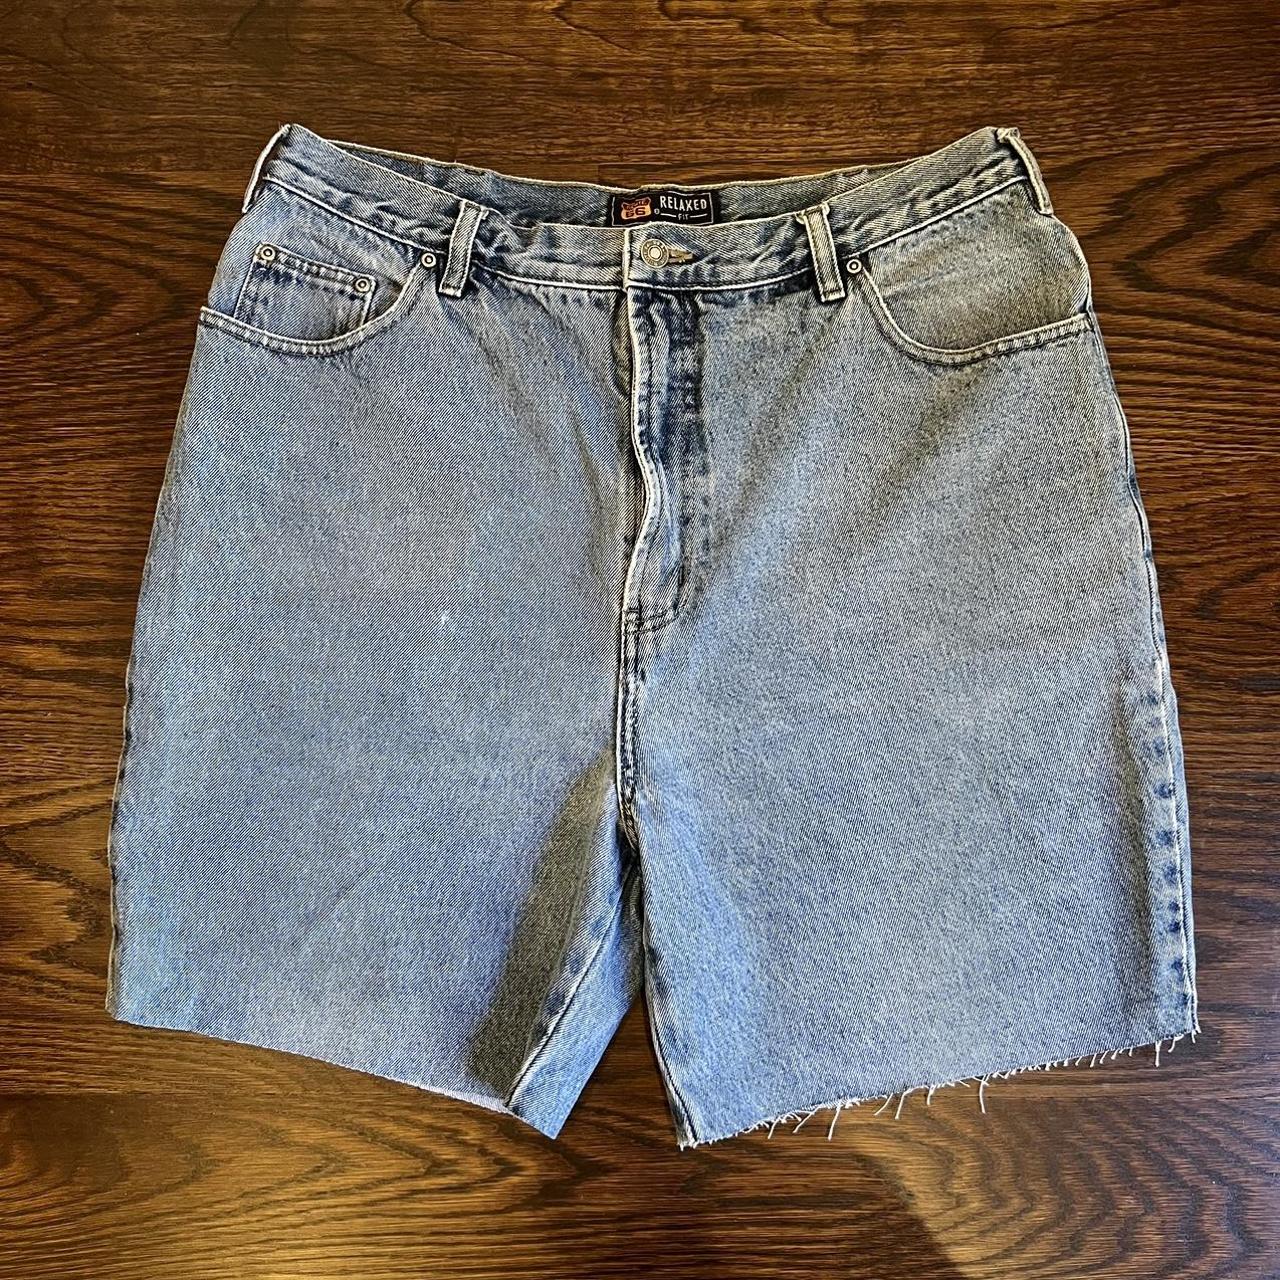 Route 66 Jorts Waist is 33 inches Oversized - Depop